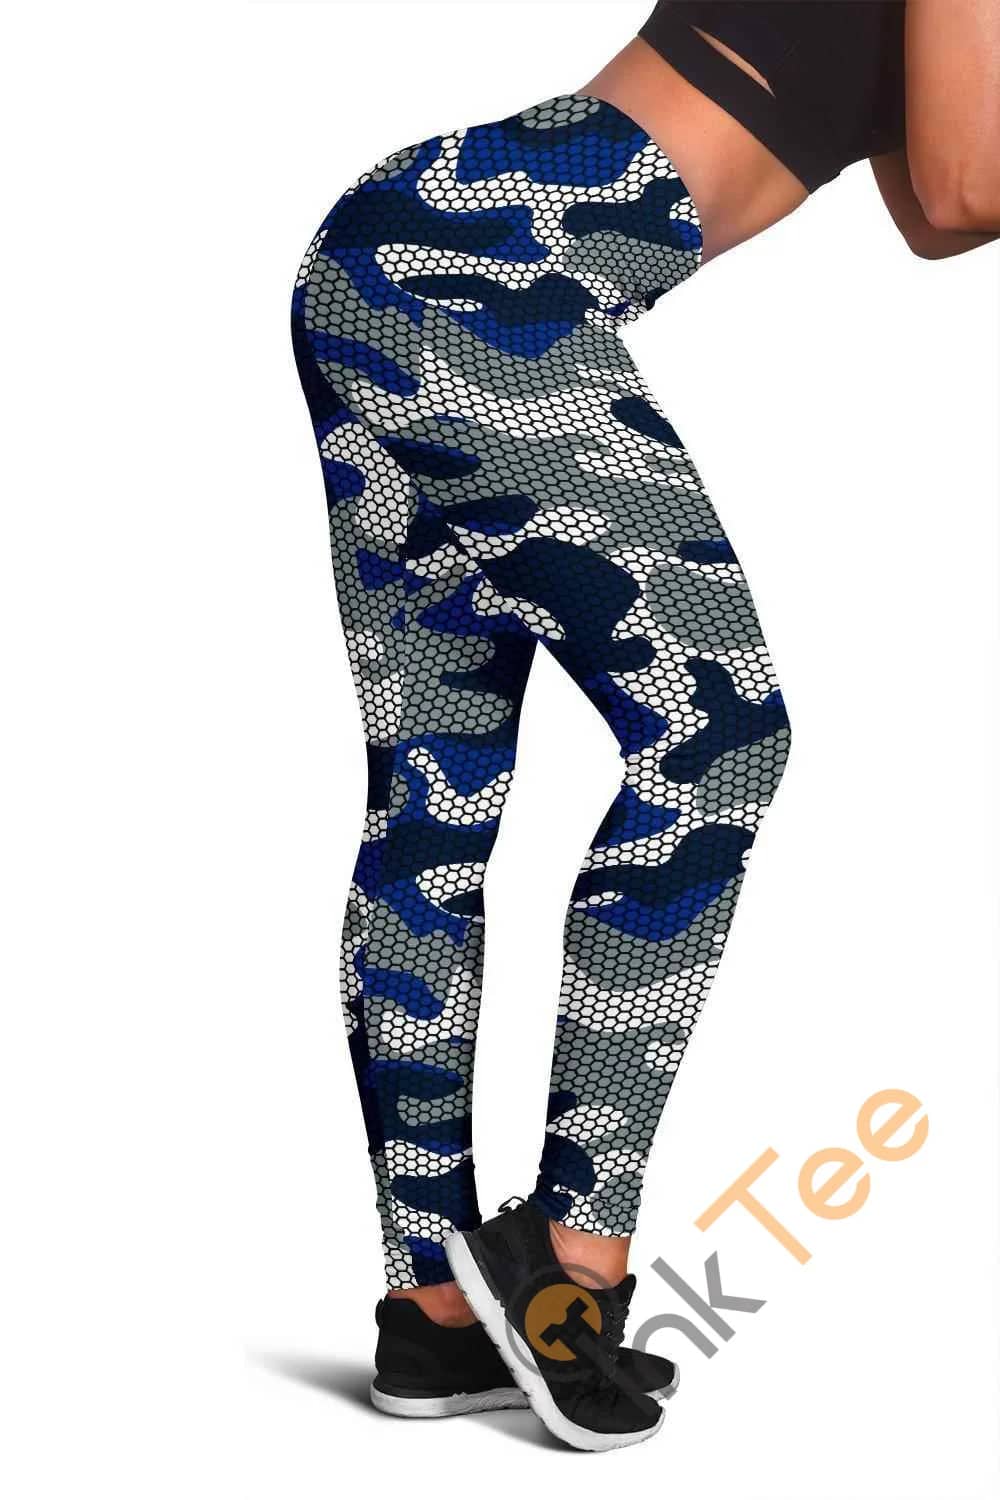 Dallas Cowboys Inspired Hex Camo 3D All Over Print For Yoga Fitness Fashion Women's Leggings